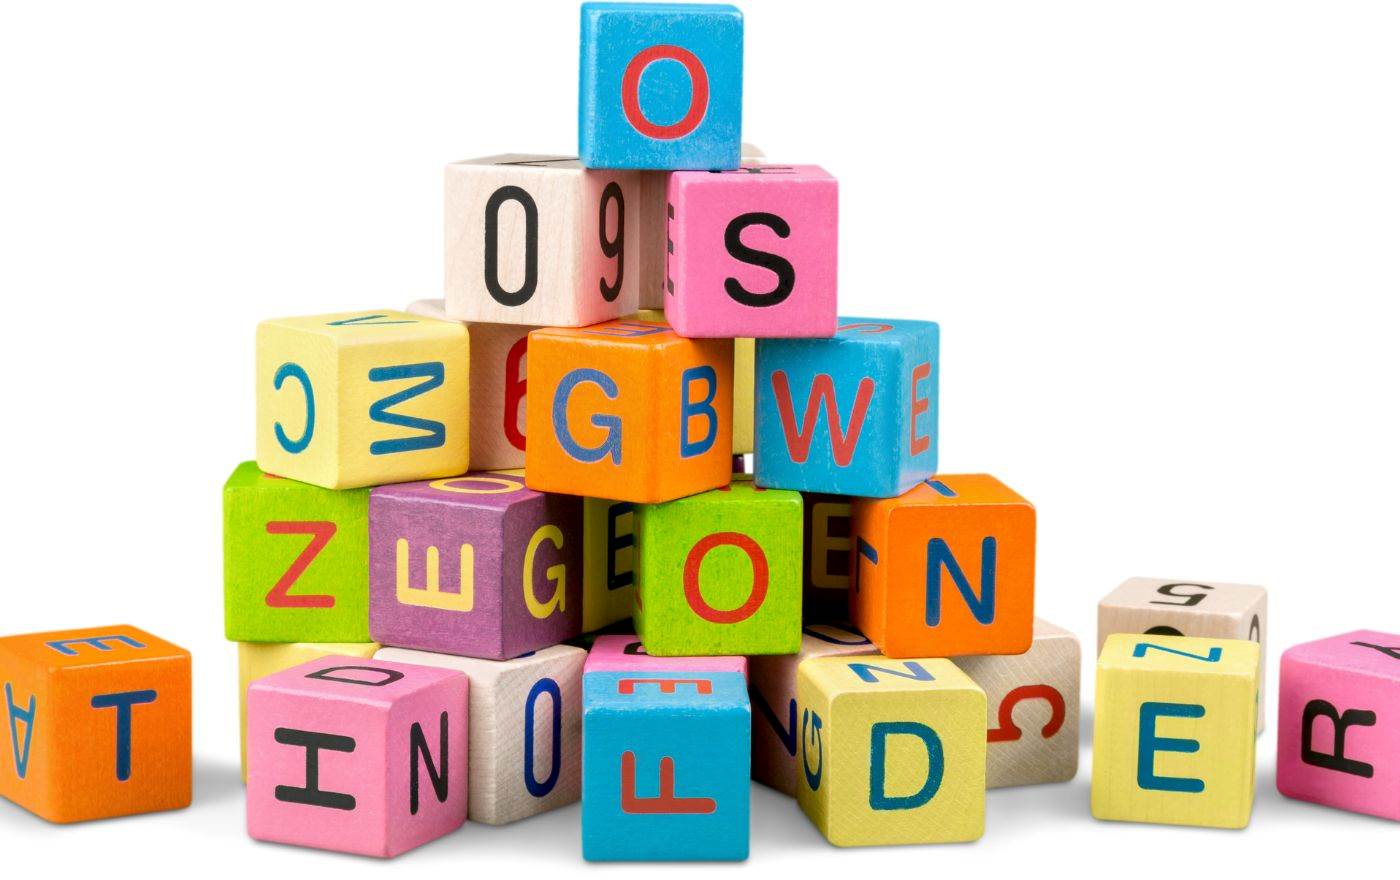 Consonants and Consonant Sounds in English